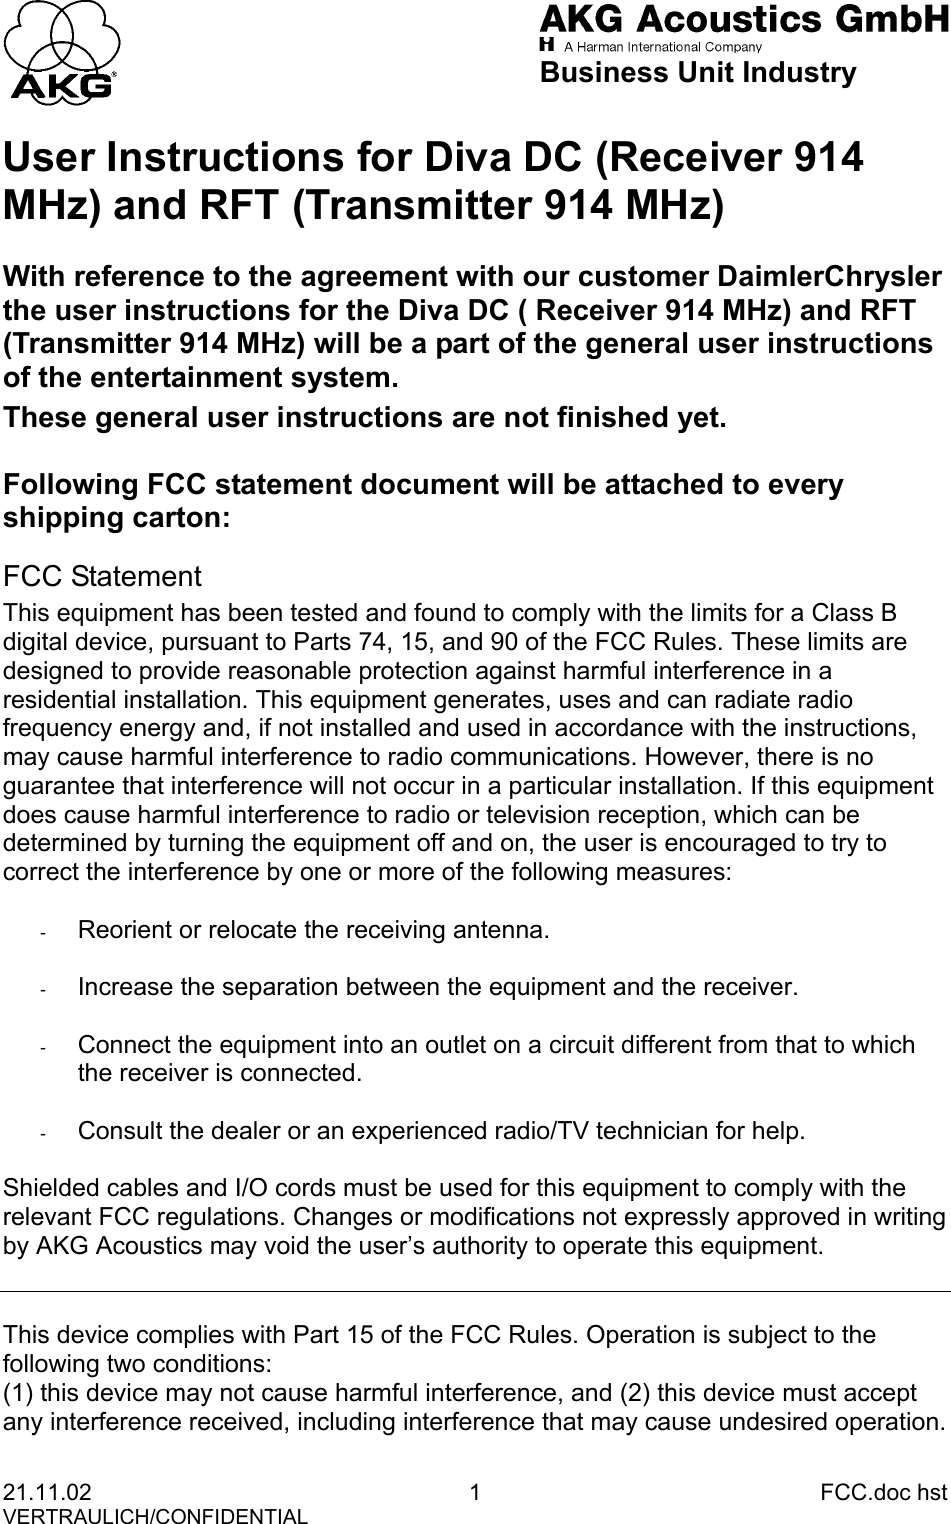                            Business Unit Industry User Instructions for Diva DC (Receiver 914 MHz) and RFT (Transmitter 914 MHz) With reference to the agreement with our customer DaimlerChrysler the user instructions for the Diva DC ( Receiver 914 MHz) and RFT (Transmitter 914 MHz) will be a part of the general user instructions of the entertainment system. These general user instructions are not finished yet.  Following FCC statement document will be attached to every shipping carton: FCC Statement This equipment has been tested and found to comply with the limits for a Class B digital device, pursuant to Parts 74, 15, and 90 of the FCC Rules. These limits are designed to provide reasonable protection against harmful interference in a residential installation. This equipment generates, uses and can radiate radio frequency energy and, if not installed and used in accordance with the instructions, may cause harmful interference to radio communications. However, there is no guarantee that interference will not occur in a particular installation. If this equipment does cause harmful interference to radio or television reception, which can be determined by turning the equipment off and on, the user is encouraged to try to correct the interference by one or more of the following measures:  -  Reorient or relocate the receiving antenna.  -  Increase the separation between the equipment and the receiver.  -  Connect the equipment into an outlet on a circuit different from that to which the receiver is connected.  -  Consult the dealer or an experienced radio/TV technician for help.  Shielded cables and I/O cords must be used for this equipment to comply with the relevant FCC regulations. Changes or modifications not expressly approved in writing by AKG Acoustics may void the user’s authority to operate this equipment.   This device complies with Part 15 of the FCC Rules. Operation is subject to the following two conditions: (1) this device may not cause harmful interference, and (2) this device must accept any interference received, including interference that may cause undesired operation. 21.11.02 1 FCC.doc hst VERTRAULICH/CONFIDENTIAL 